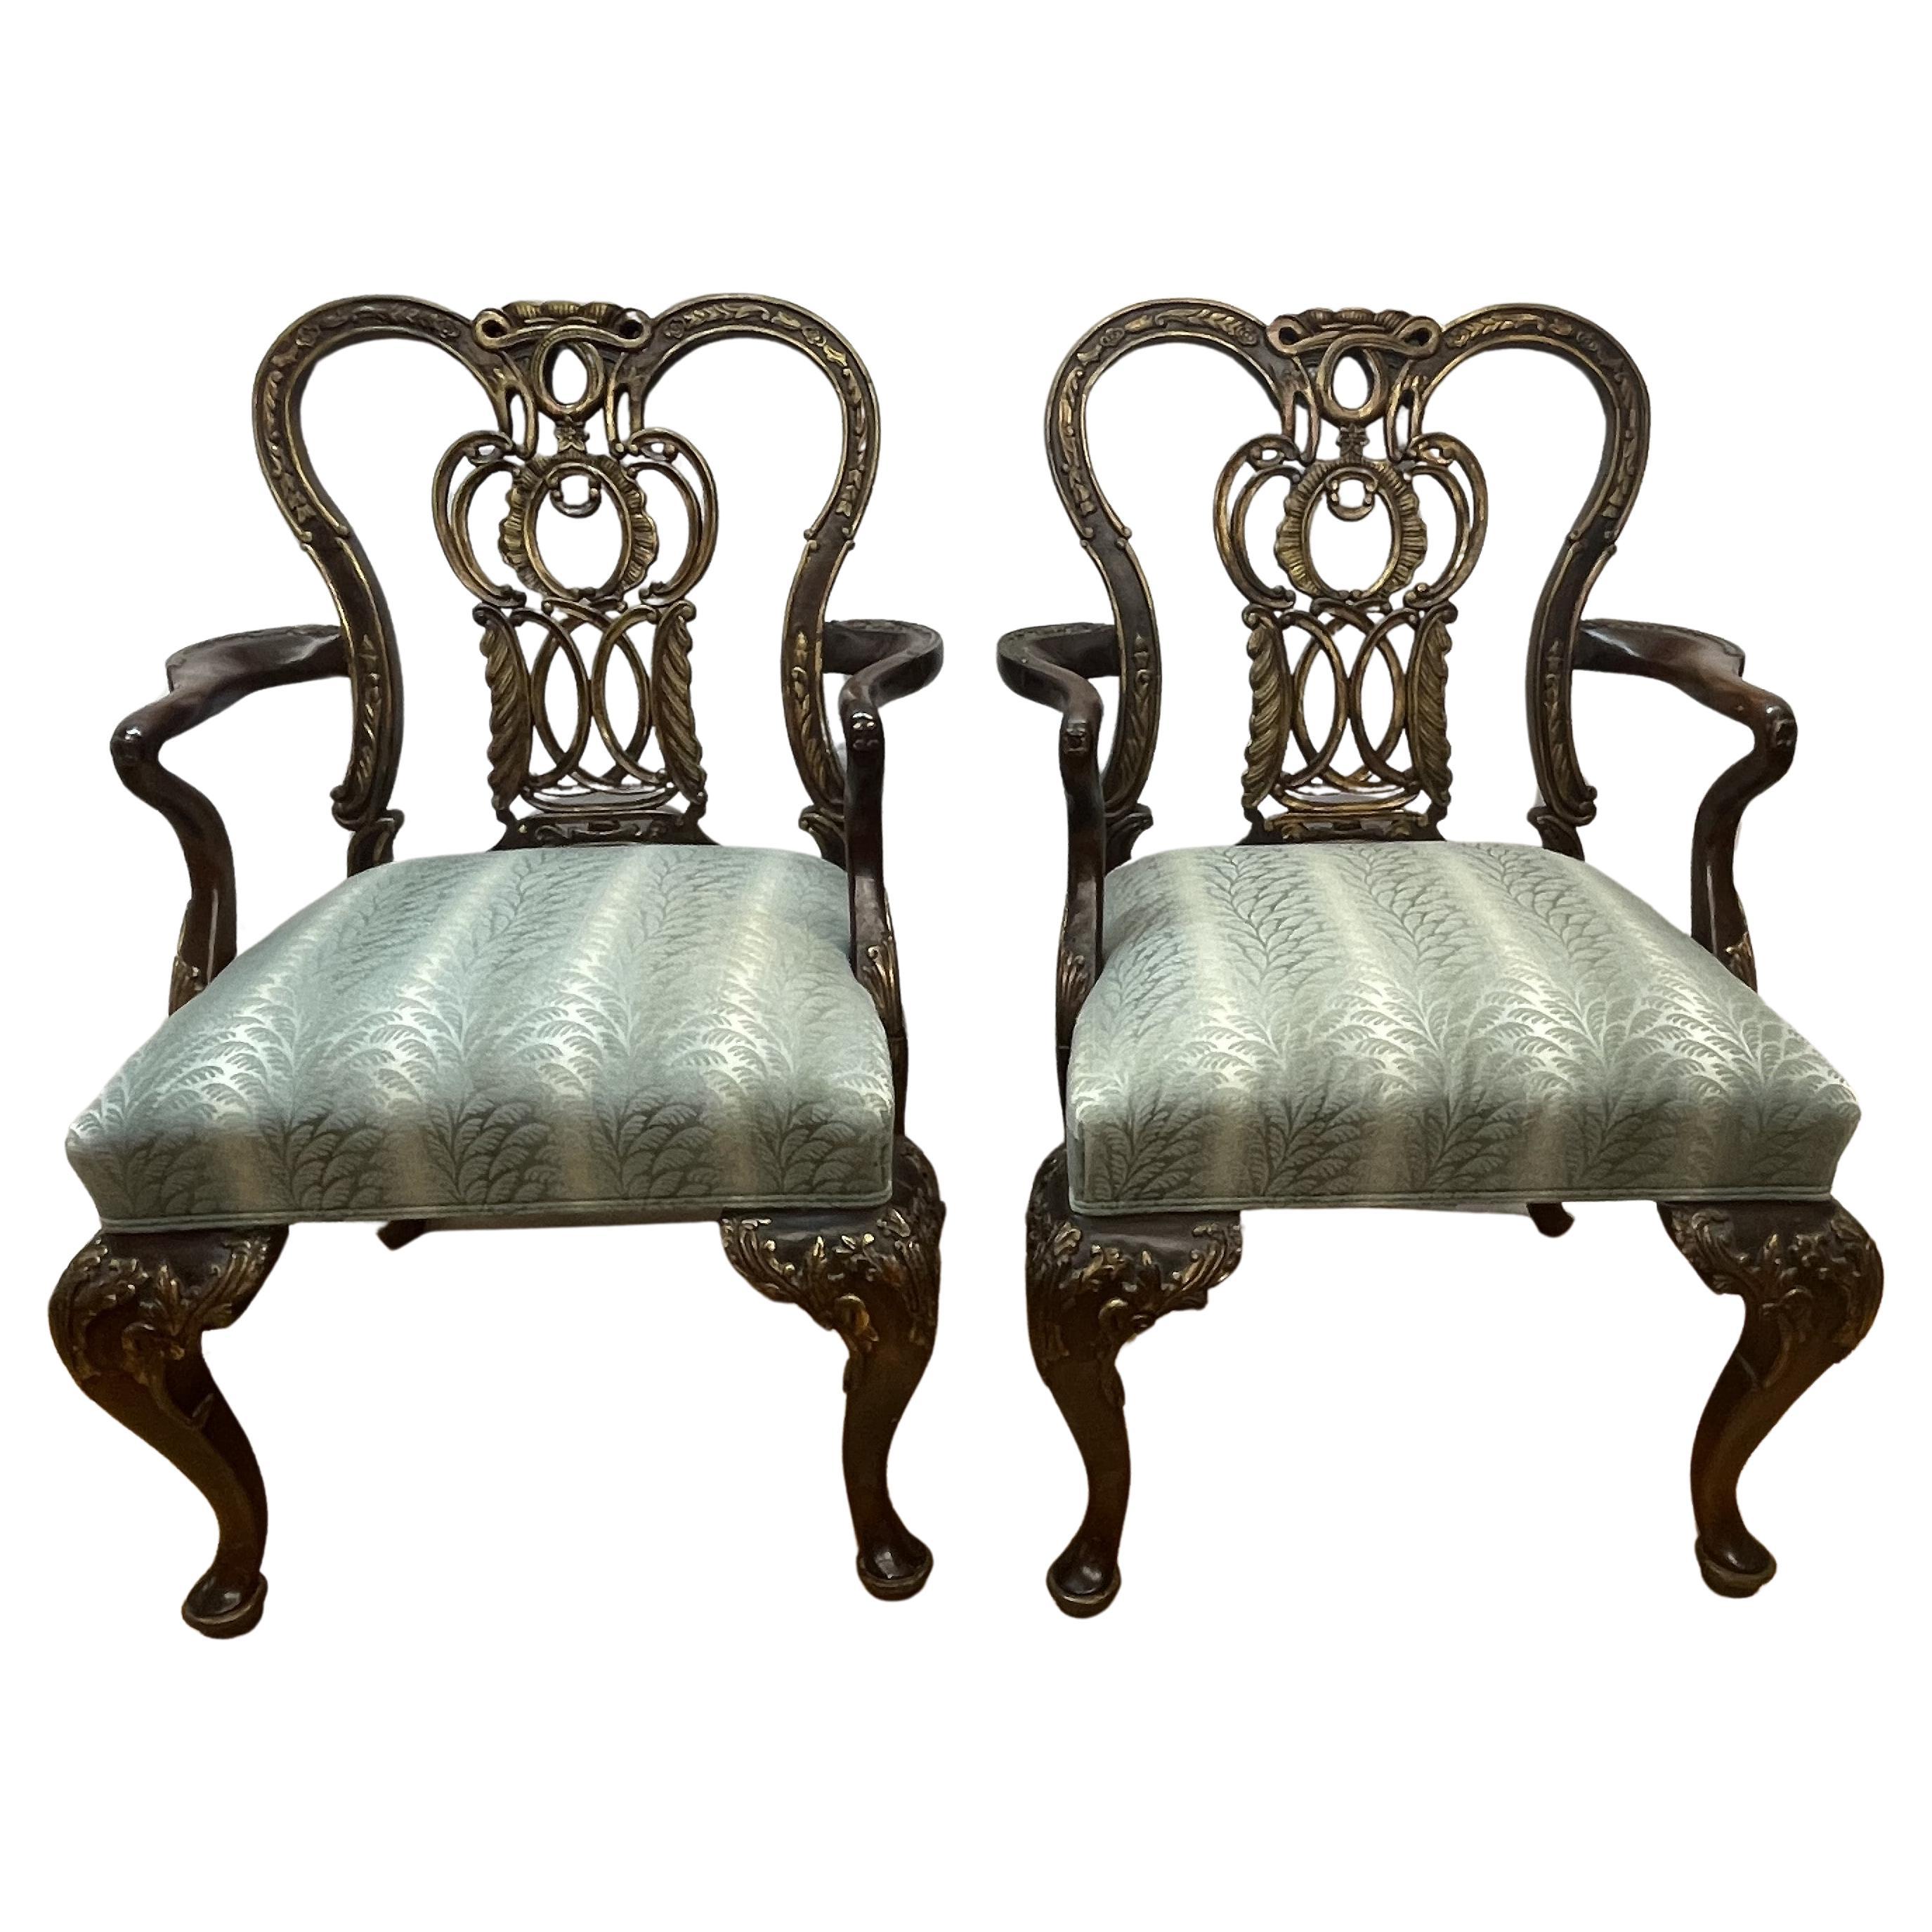 Pair of mahogany century armchair Chippendale revival For Sale